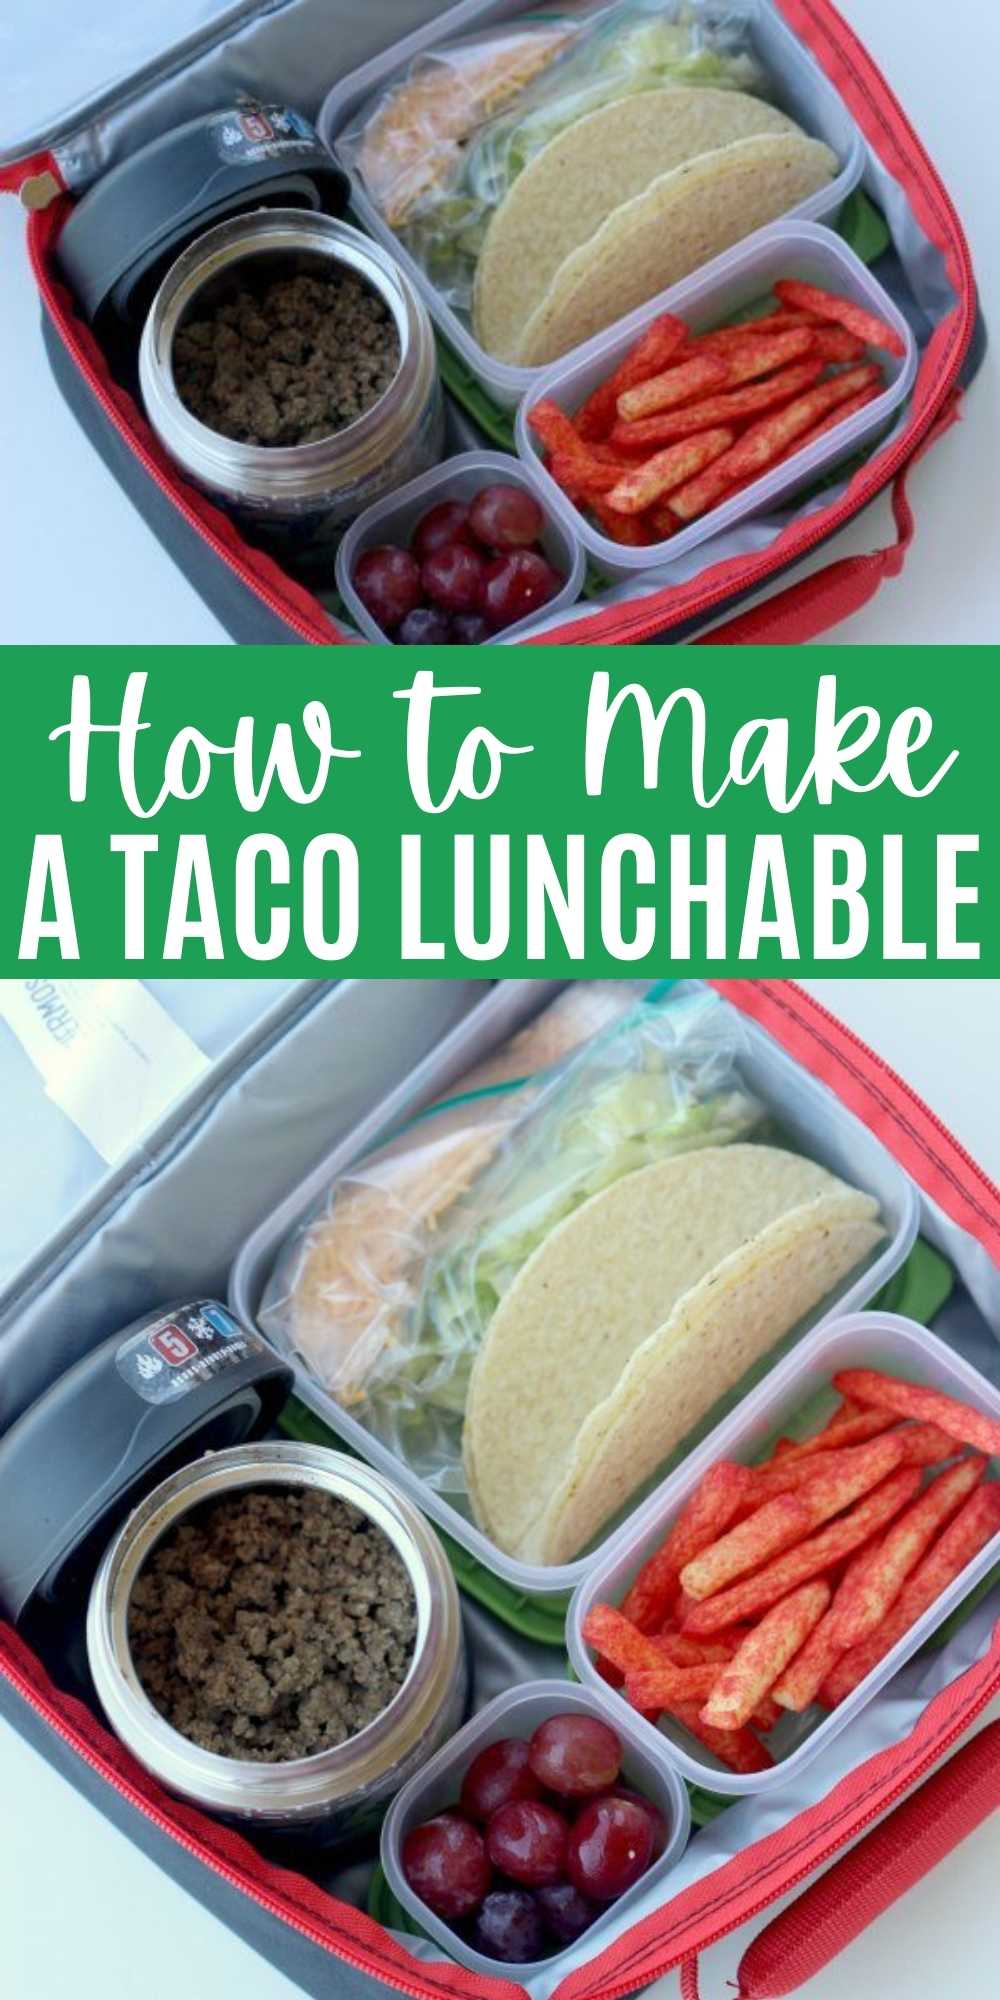 Learn how to pack tacos for lunch for kids or for adults with this homemade taco punchable recipe.  You are going to love this easy lunch idea for kids and you won’t believe the secret trick for keeping tacos warm for lunch! How to pack tacos in a lunchbox is easier than you think with this DIY Taco Lunchable!  #eatingonadime #lunchideas #lunchboxrecipes #lunchtacos #tacolunchable 
